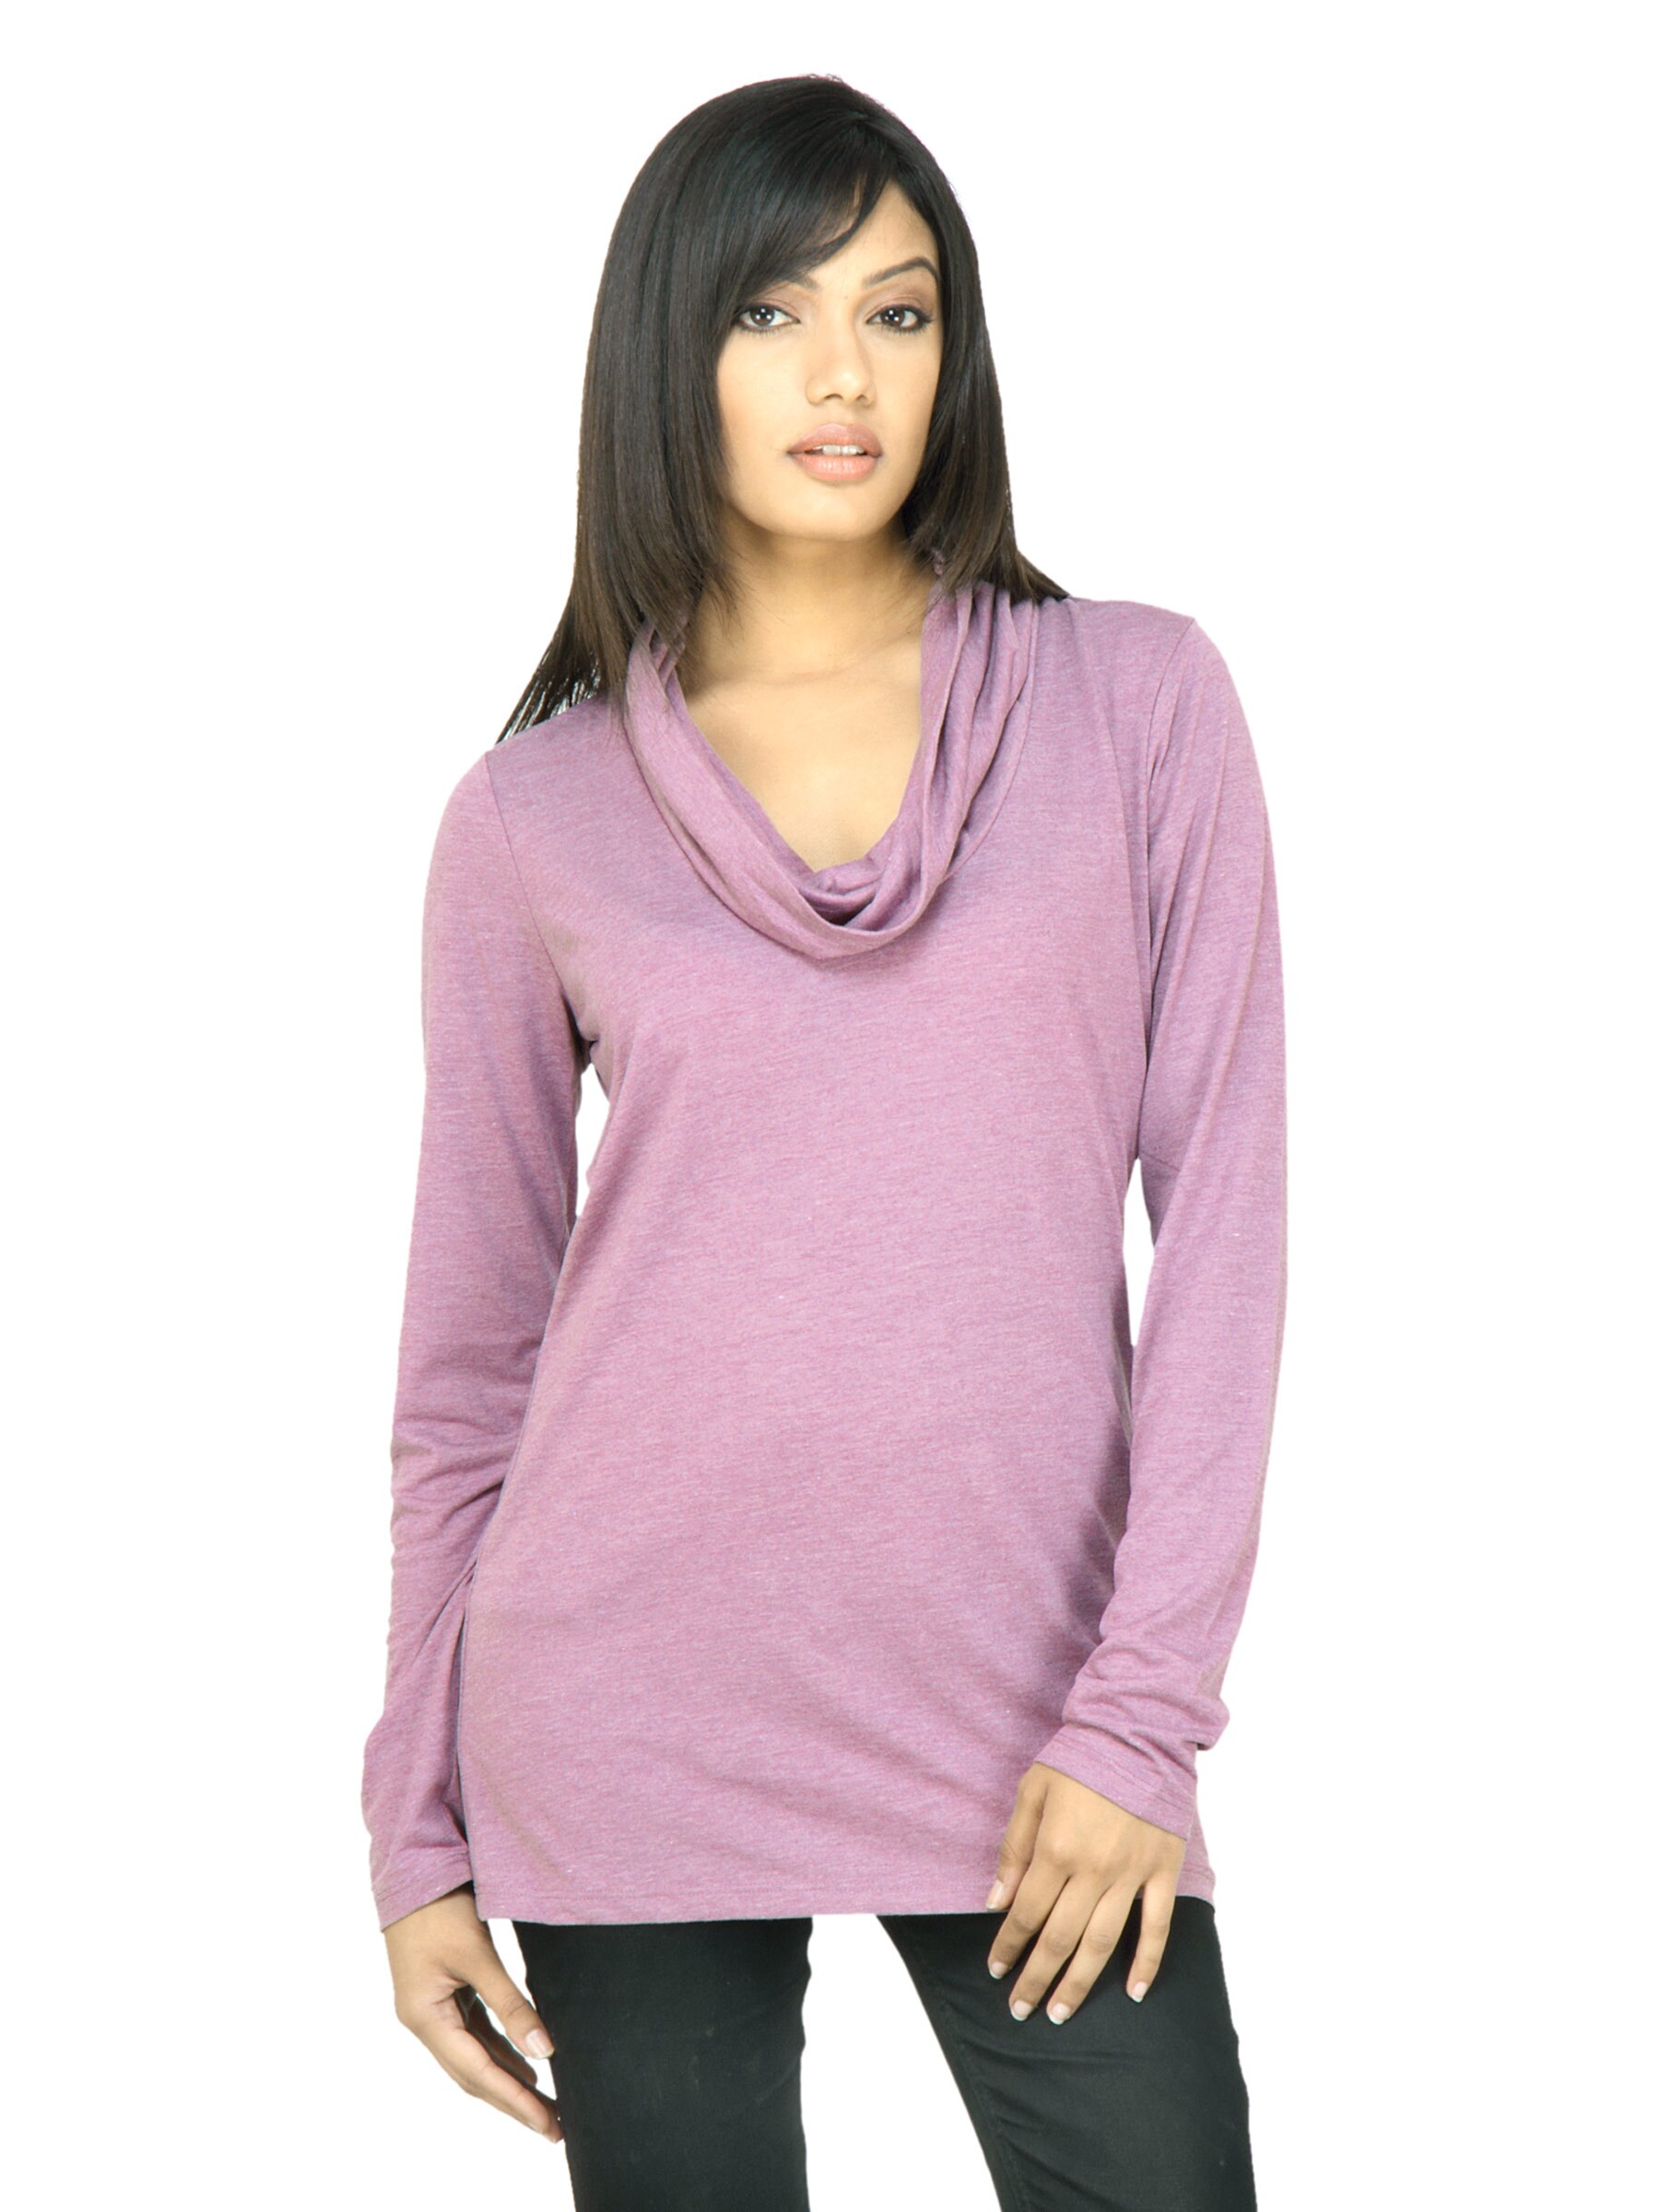 United Colors of Benetton Women Solid Lavender Top